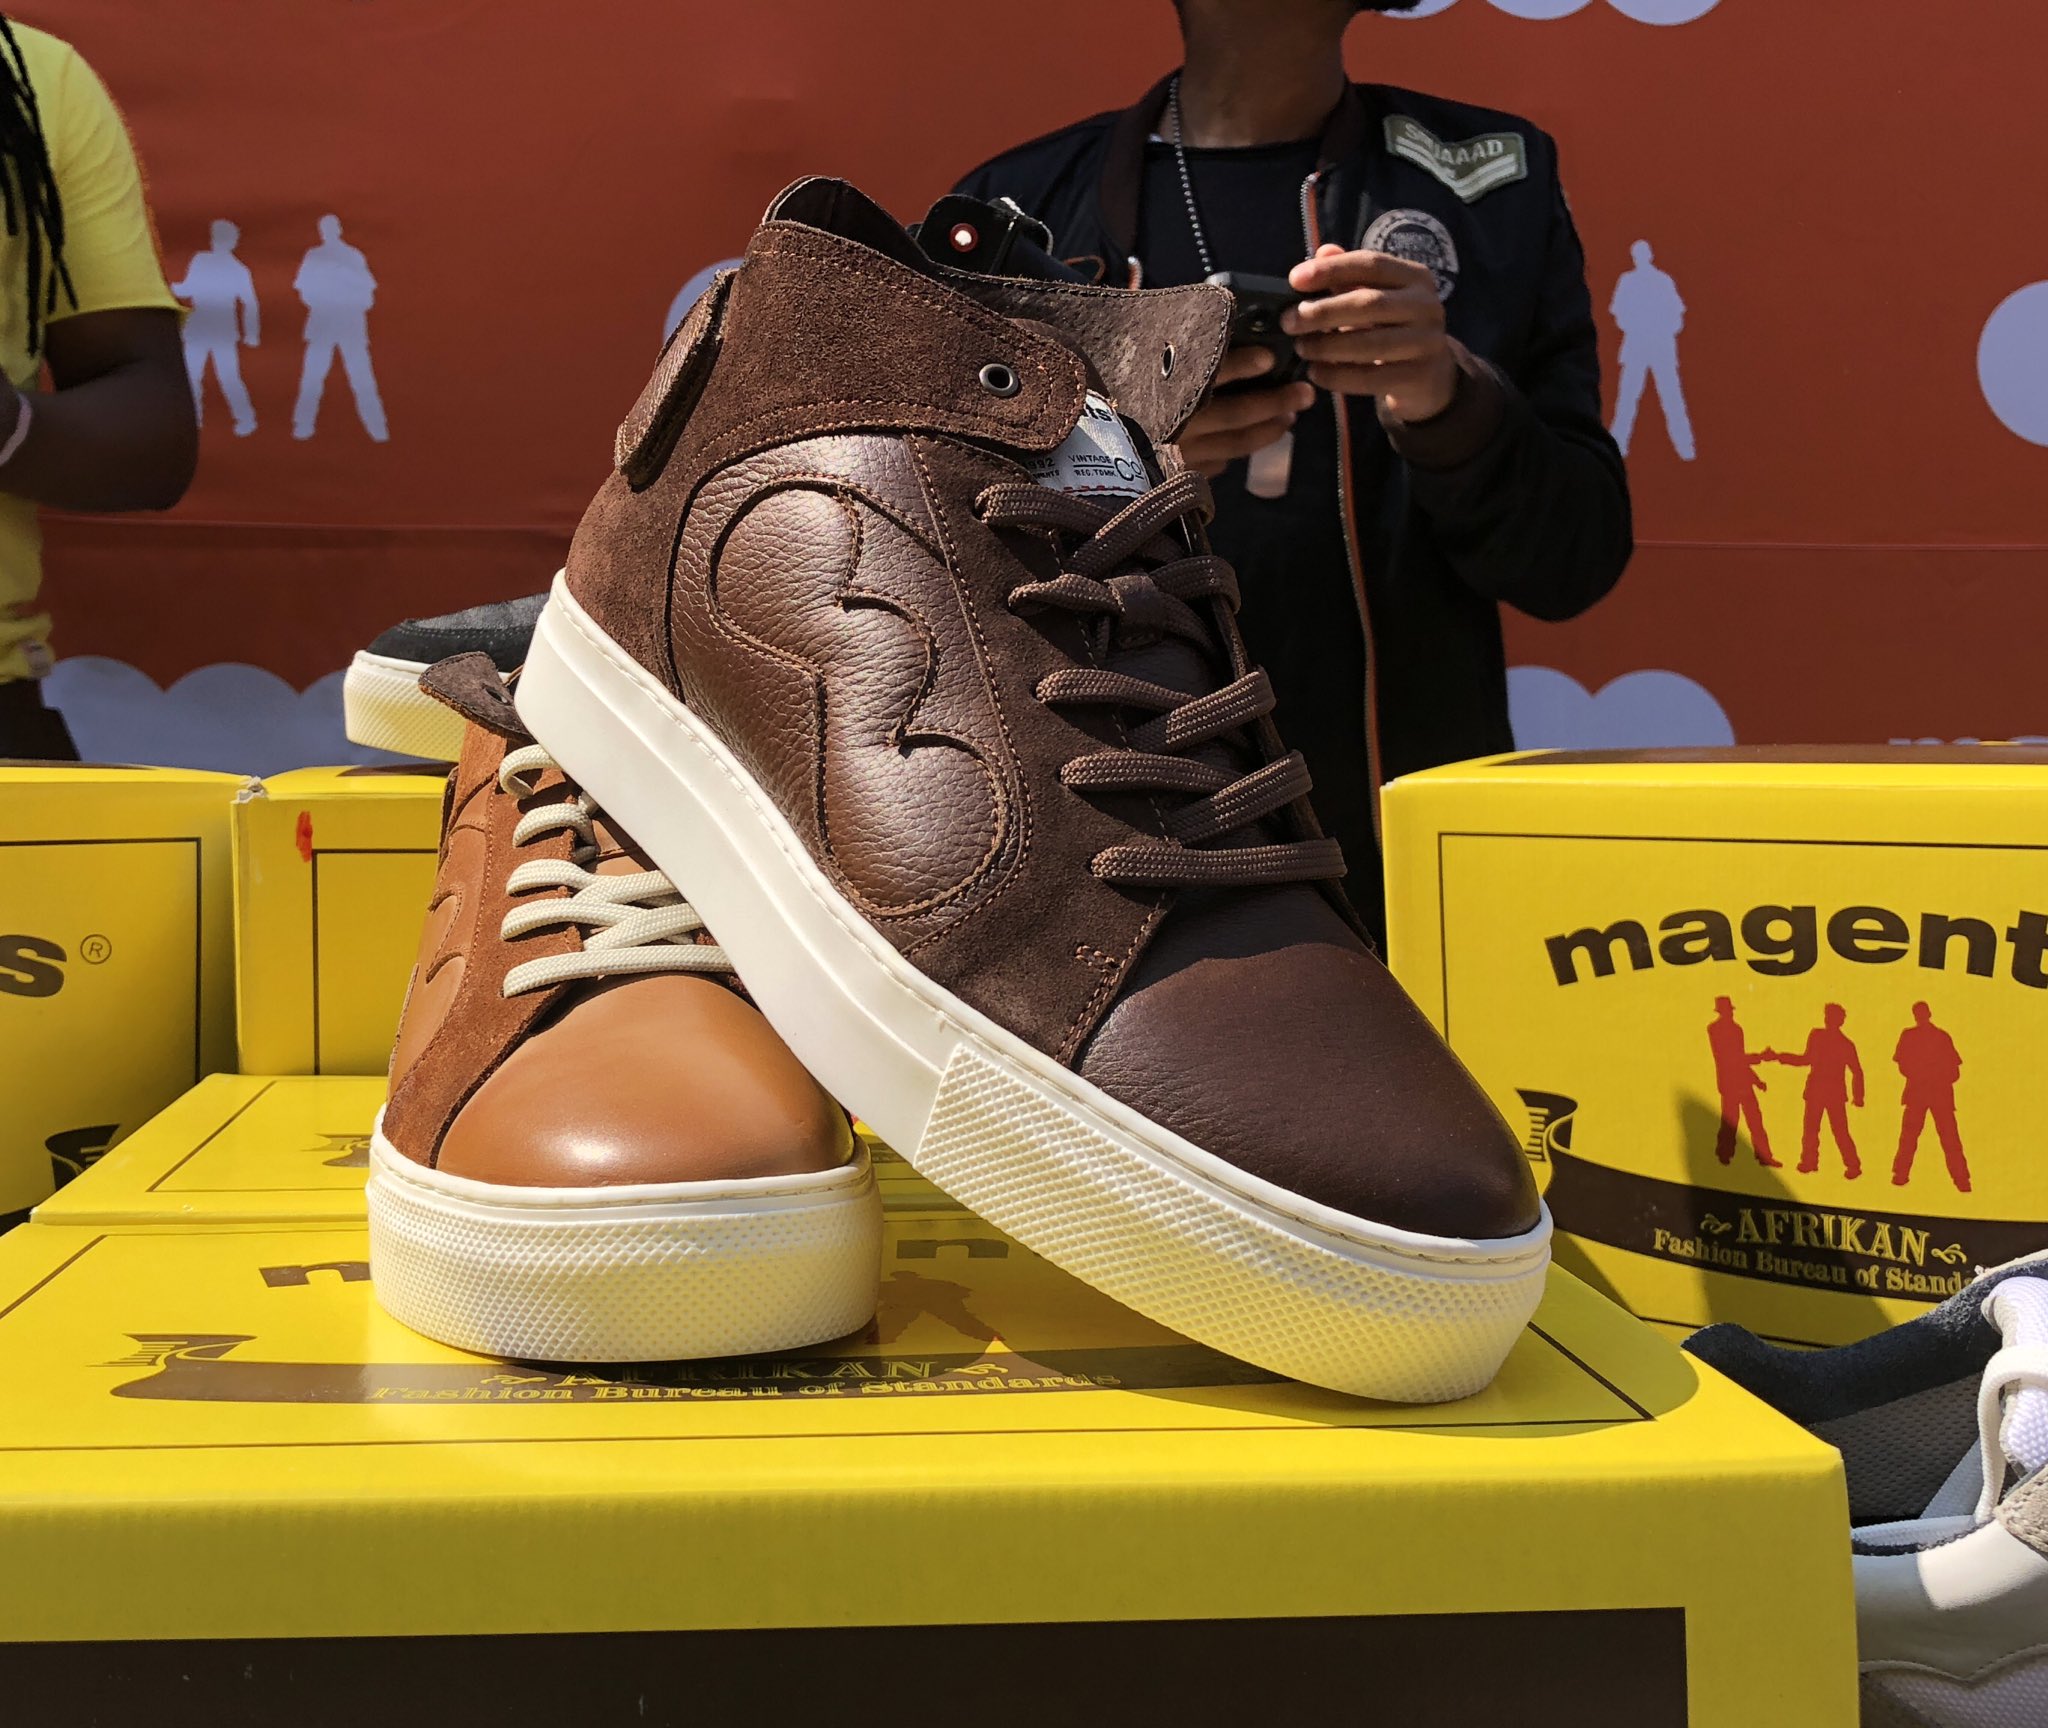 Magents® on your flavour? 🍫🍫 #magents #sneakers #sneakerhead https://t.co/3mQfT19X4Q" / X